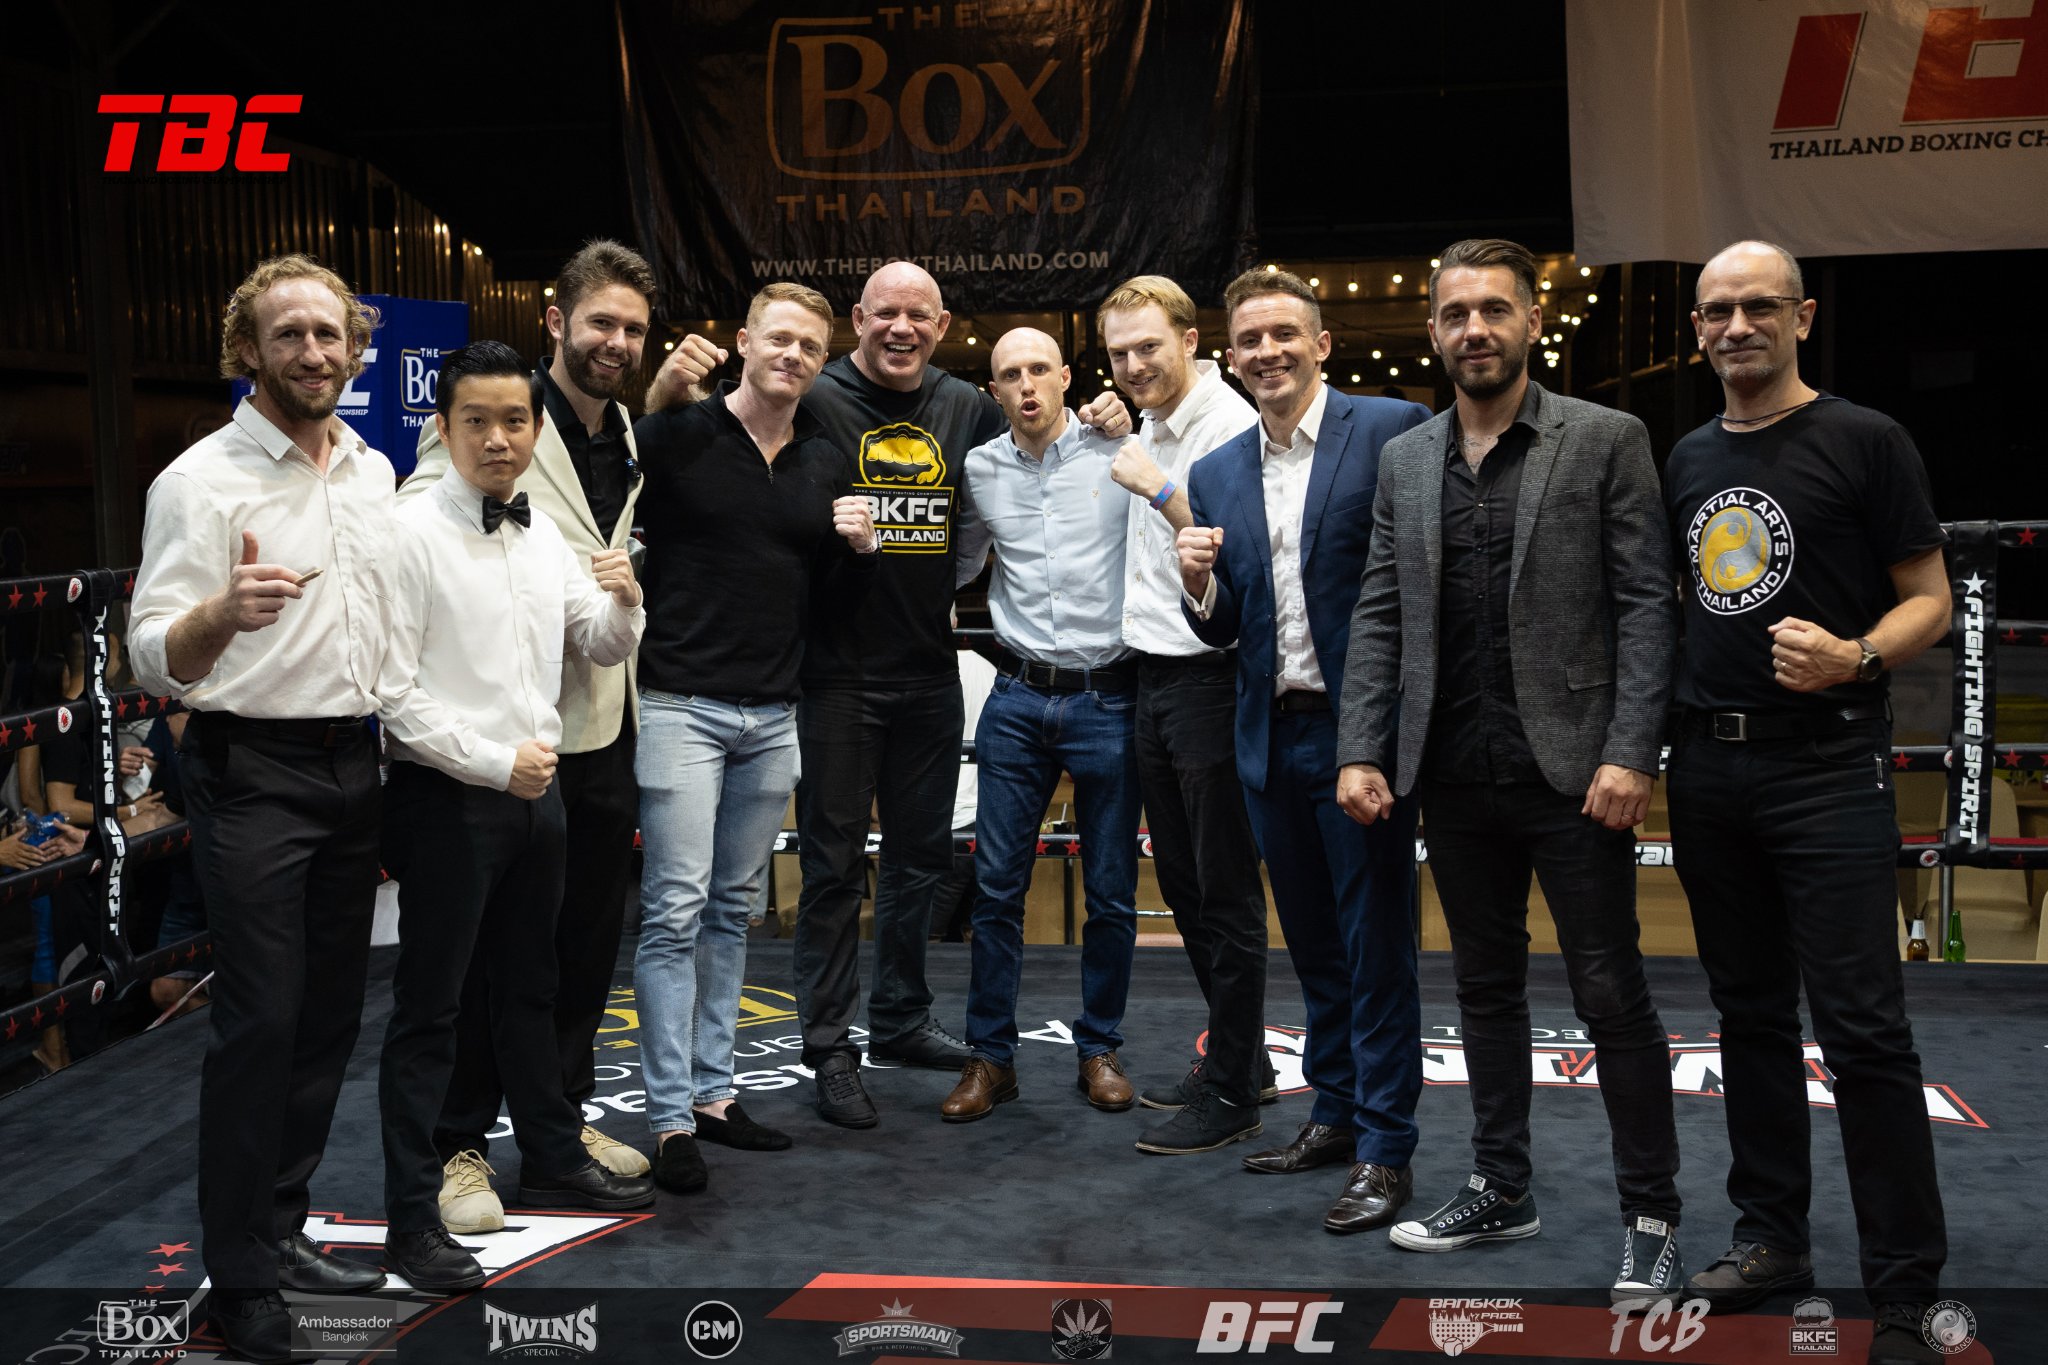 Group image at TBC 2022 with Tommy Hayden, Luke Rockwell, Nick Chapman, Ali McOnie, Jimmy Bowe, Mark Abbott, Paul Windsor, Paolo Vettore